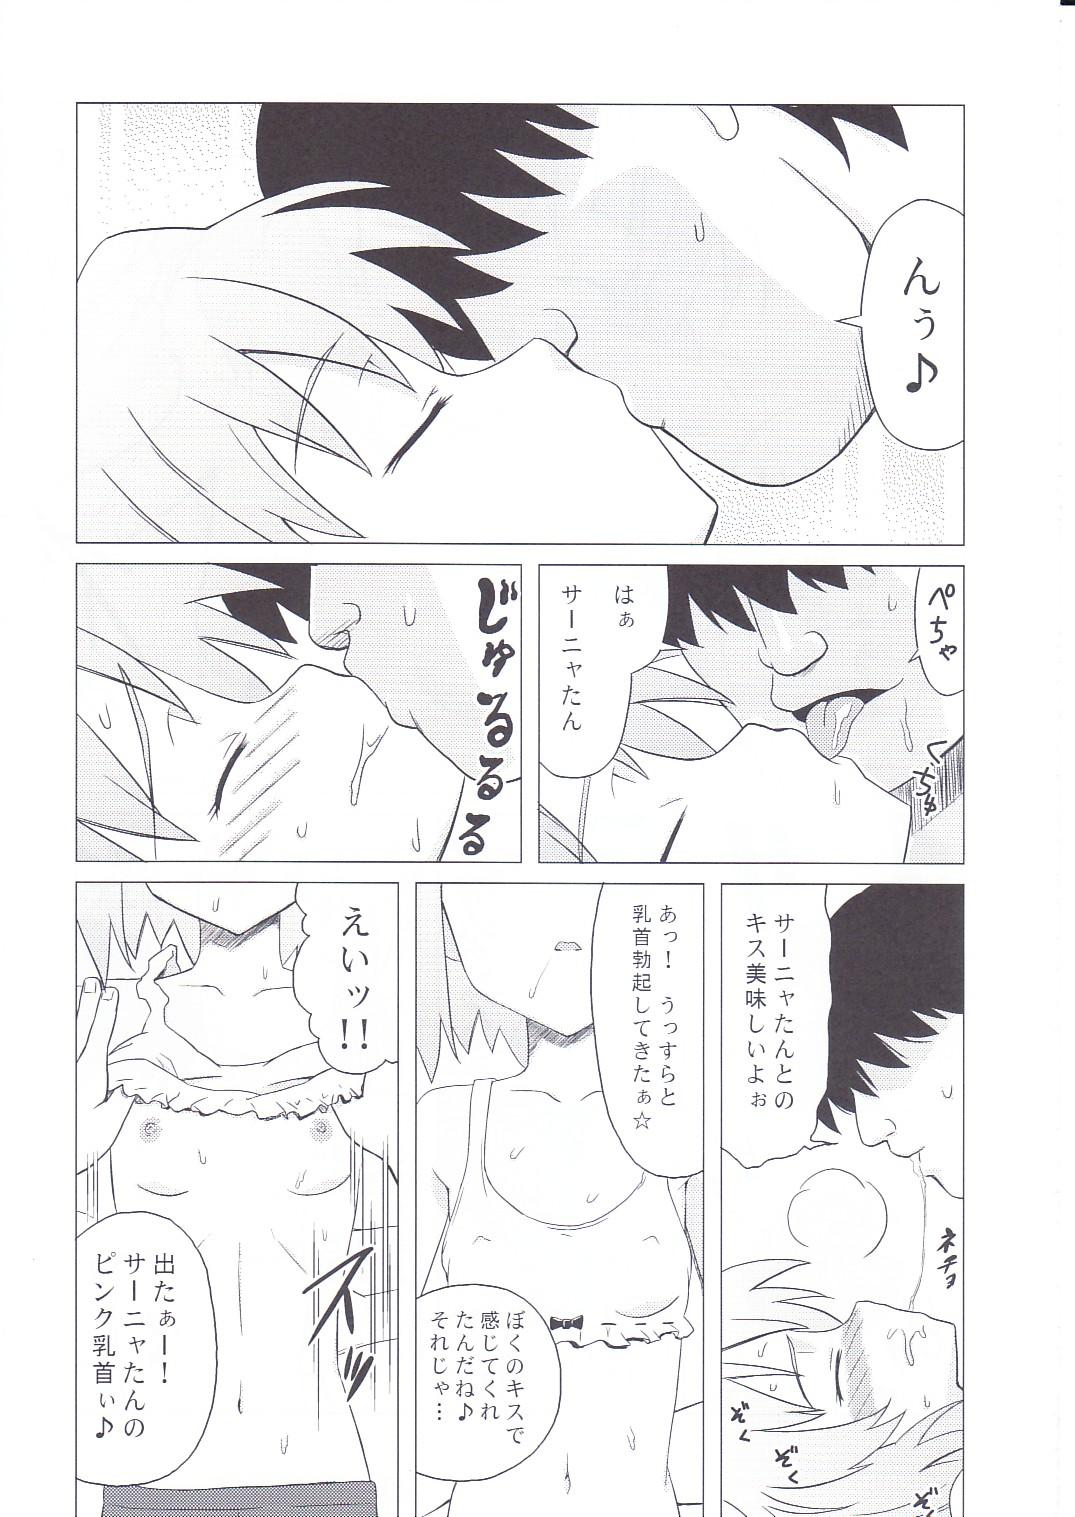 Ssbbw Sleeping witches - Strike witches Fisting - Page 6